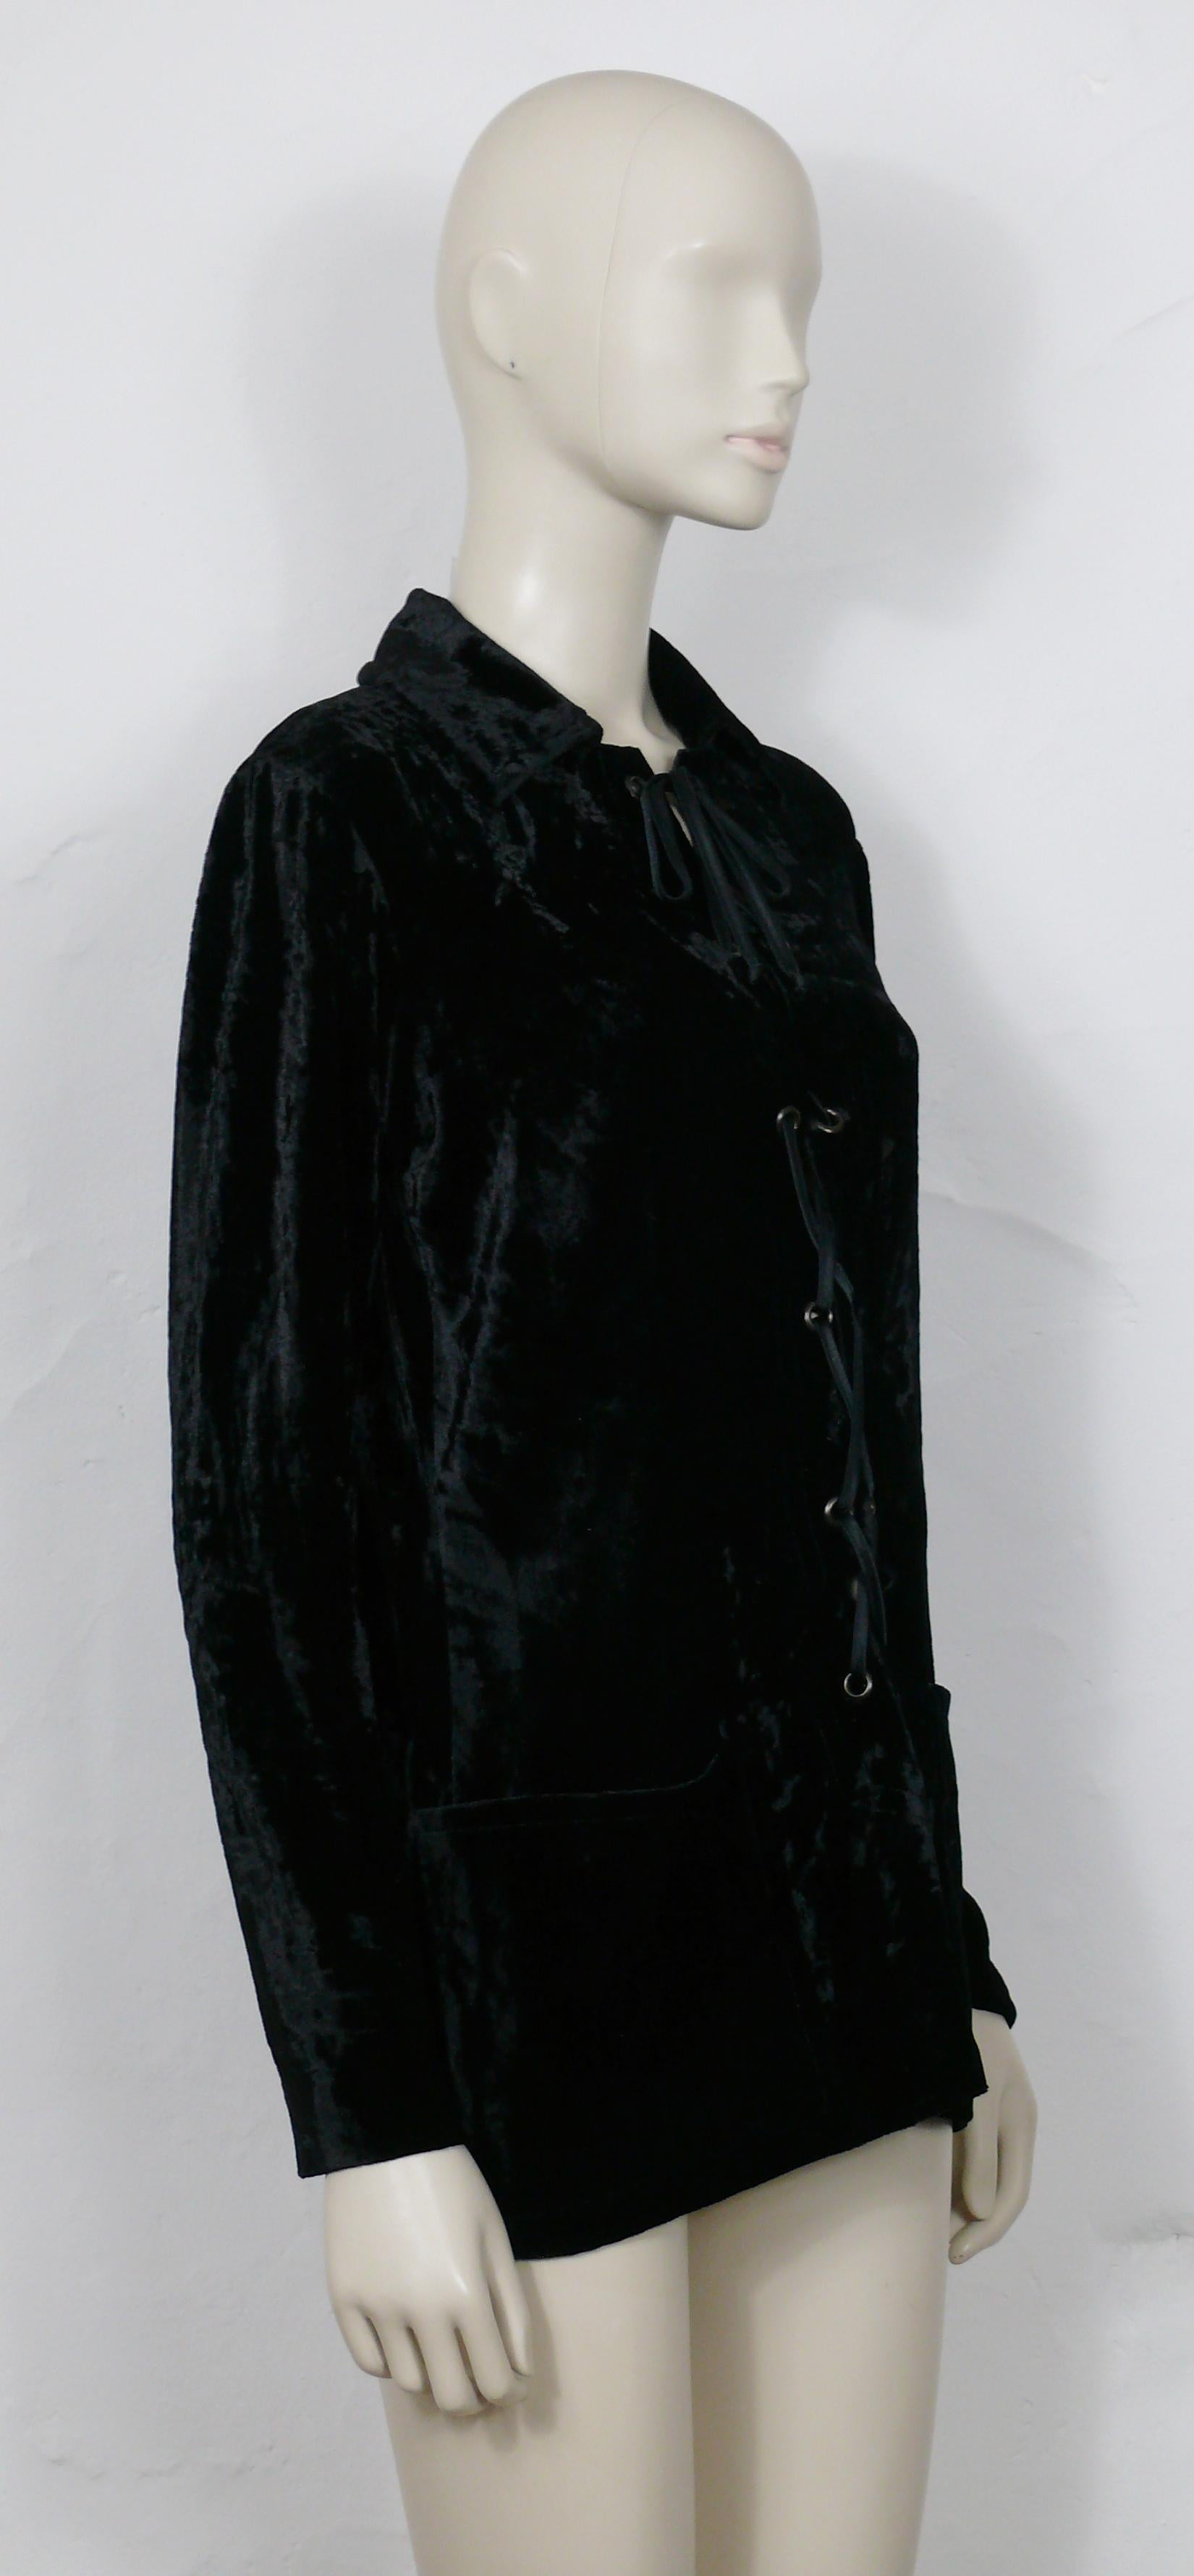 YVES SAINT LAURENT VARIATION vintage iconic black velvet SAFARI shirt.

This shirt features :
- Lace-up front construction with metal eyelets and black satin rope.
- 2 front pockets.
- Long sleeves.
- Unlined.

Label reads YVES SAINT LAURENT